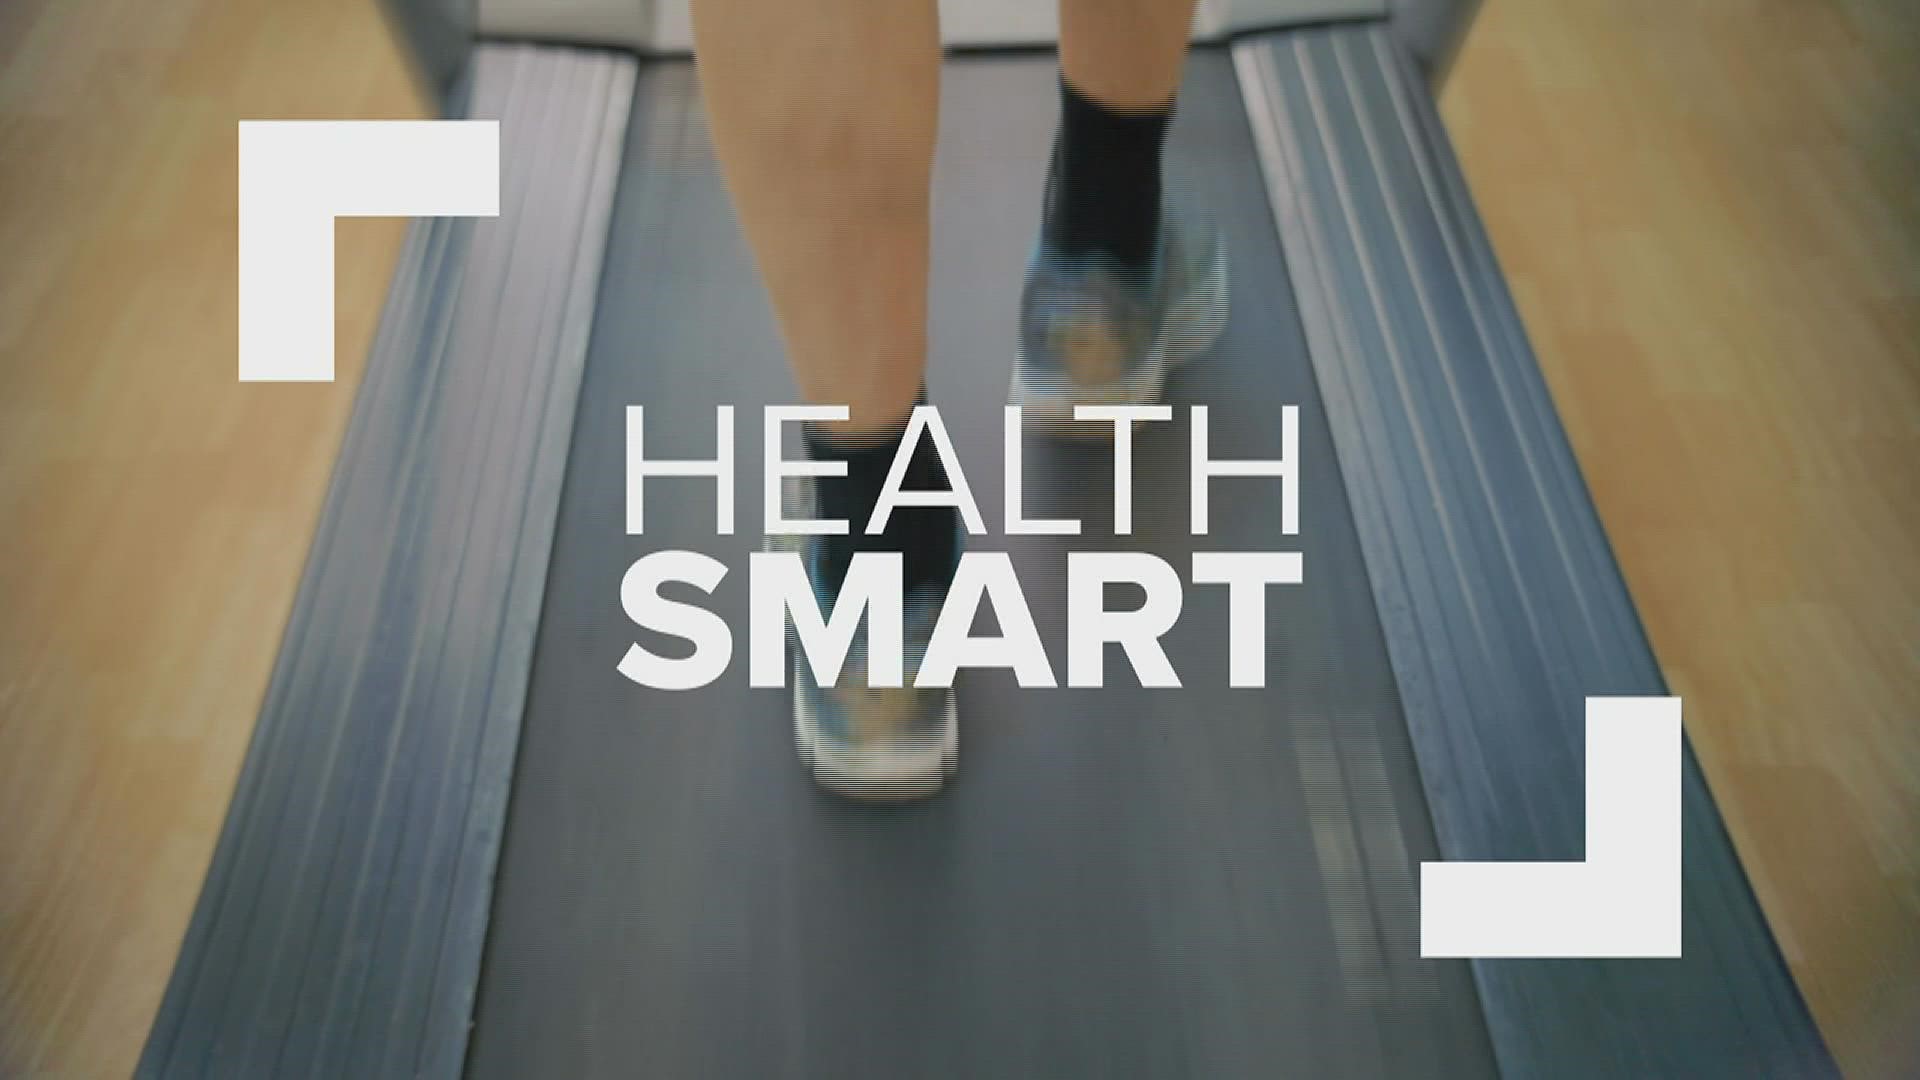 A look at the top three health headlines from the week to keep you Health Smart.